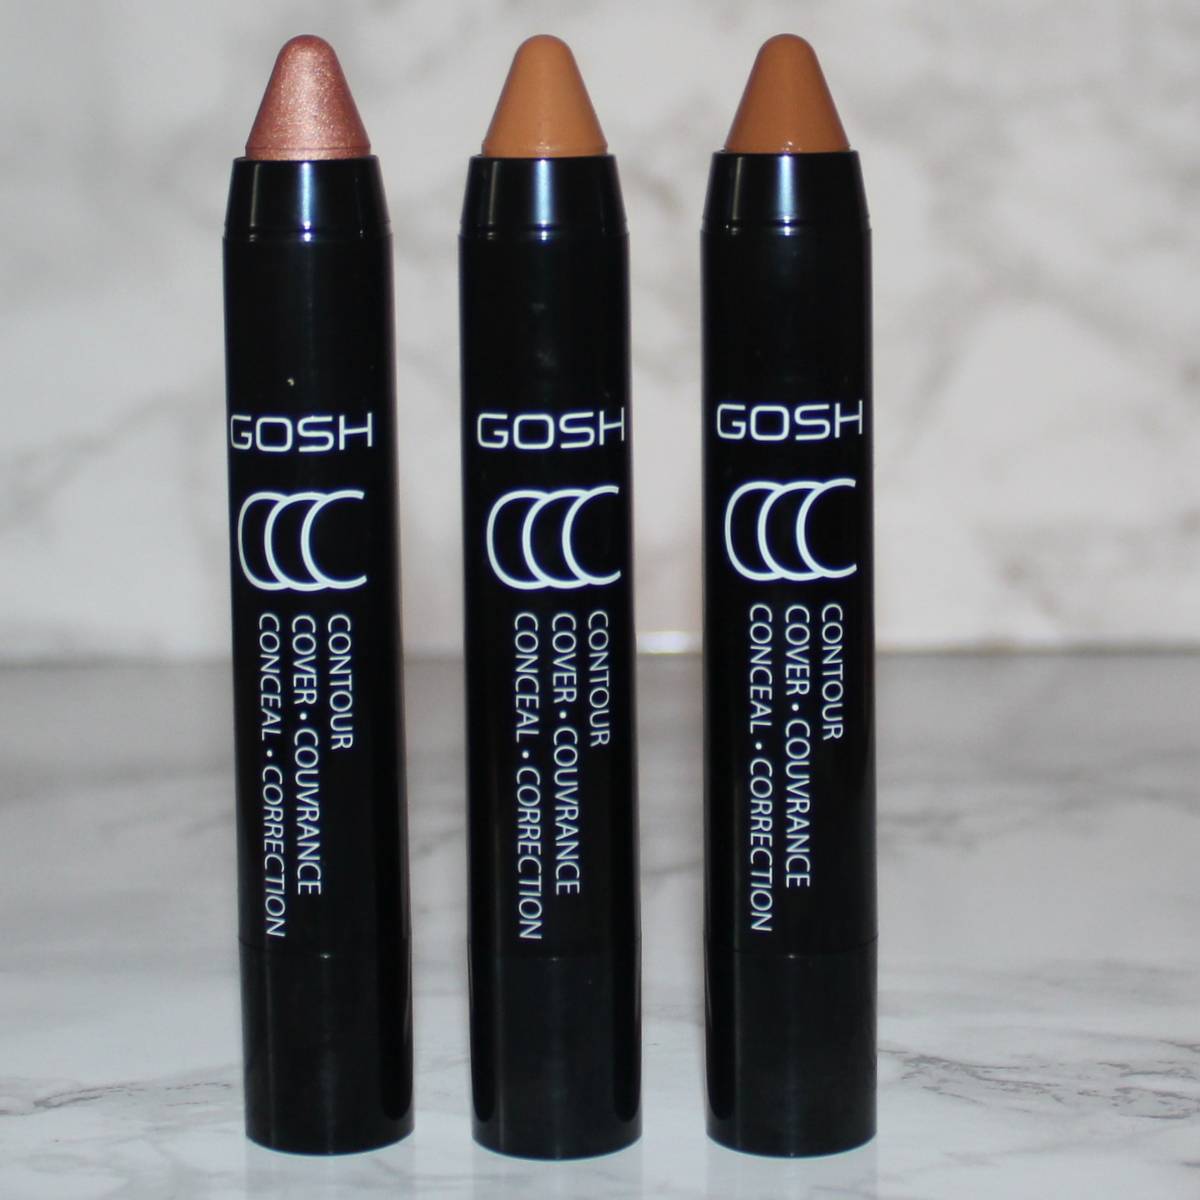 GOSH SS17 Contour Cover Conceal in Golden, Dark and Very Dark